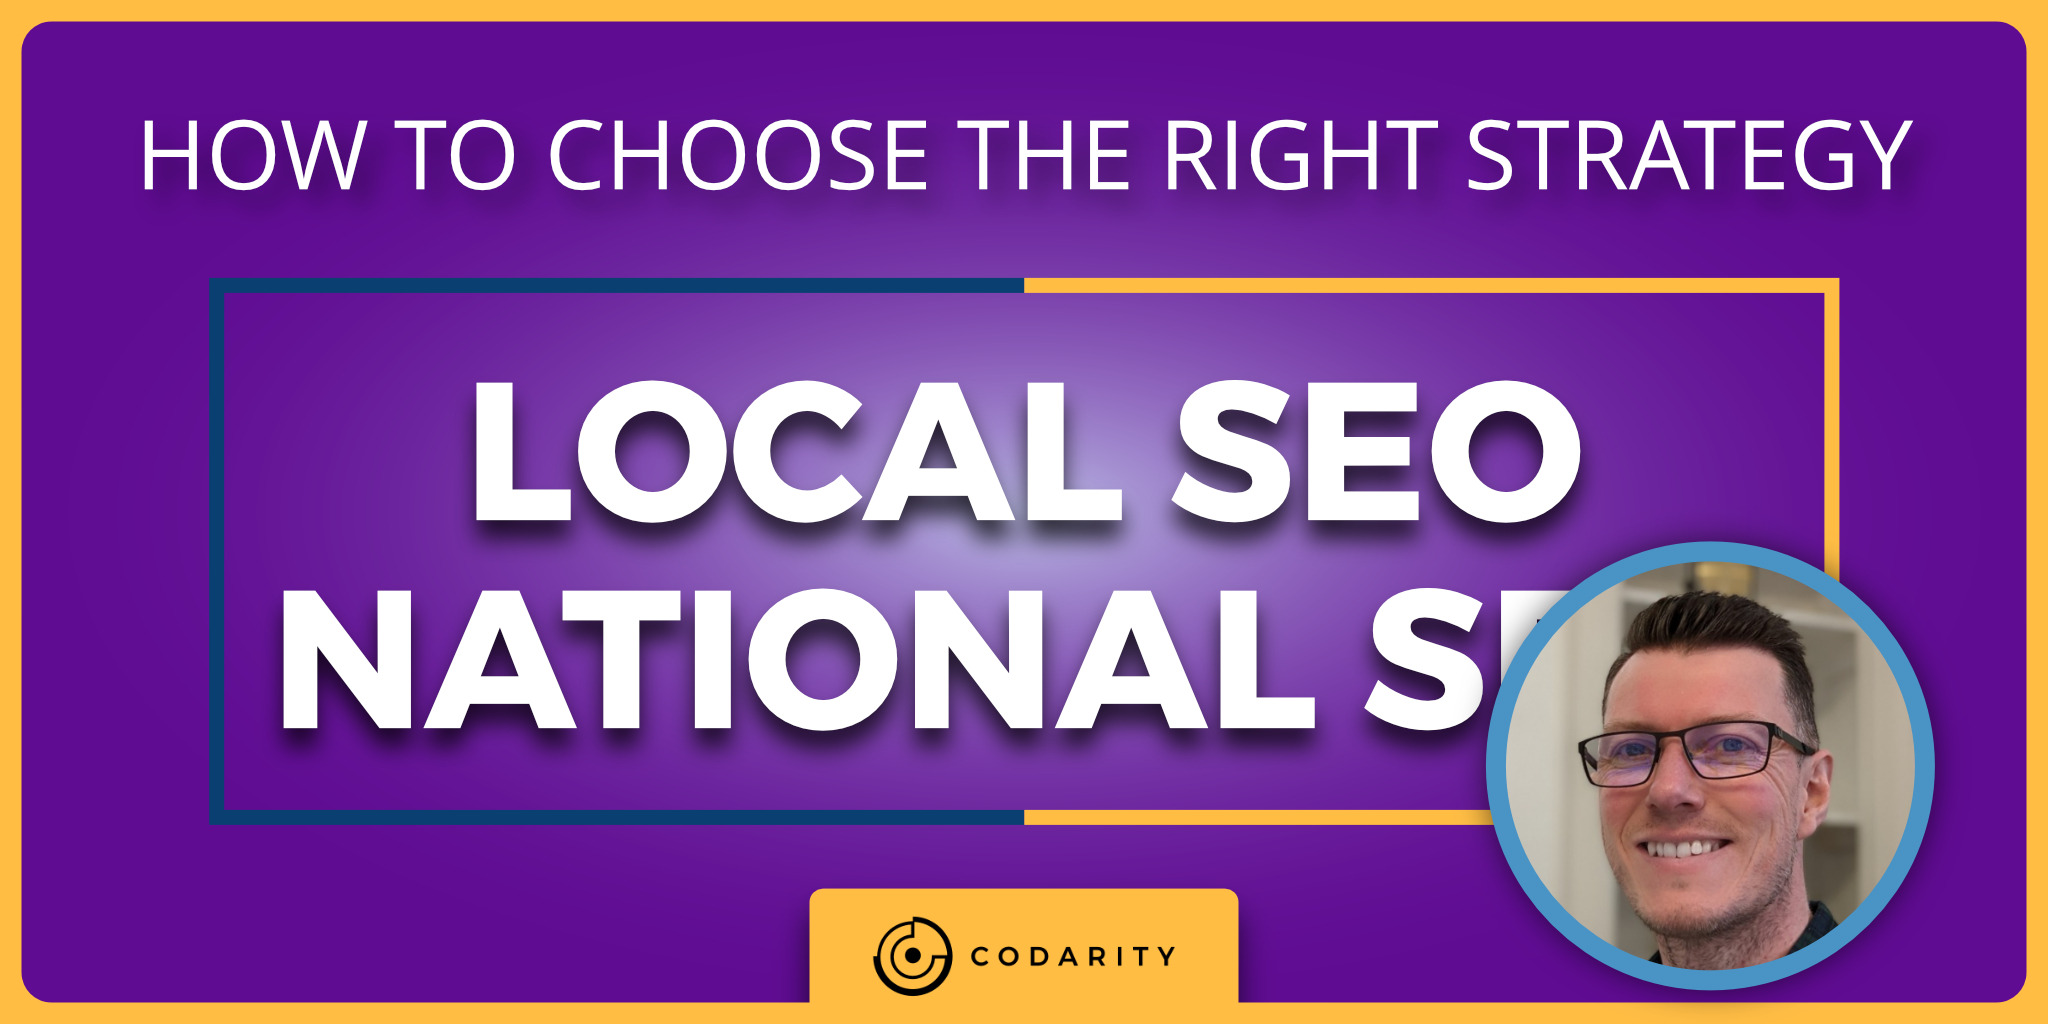 Featured image for “Local SEO vs National SEO: How To Choose The Right Strategy”